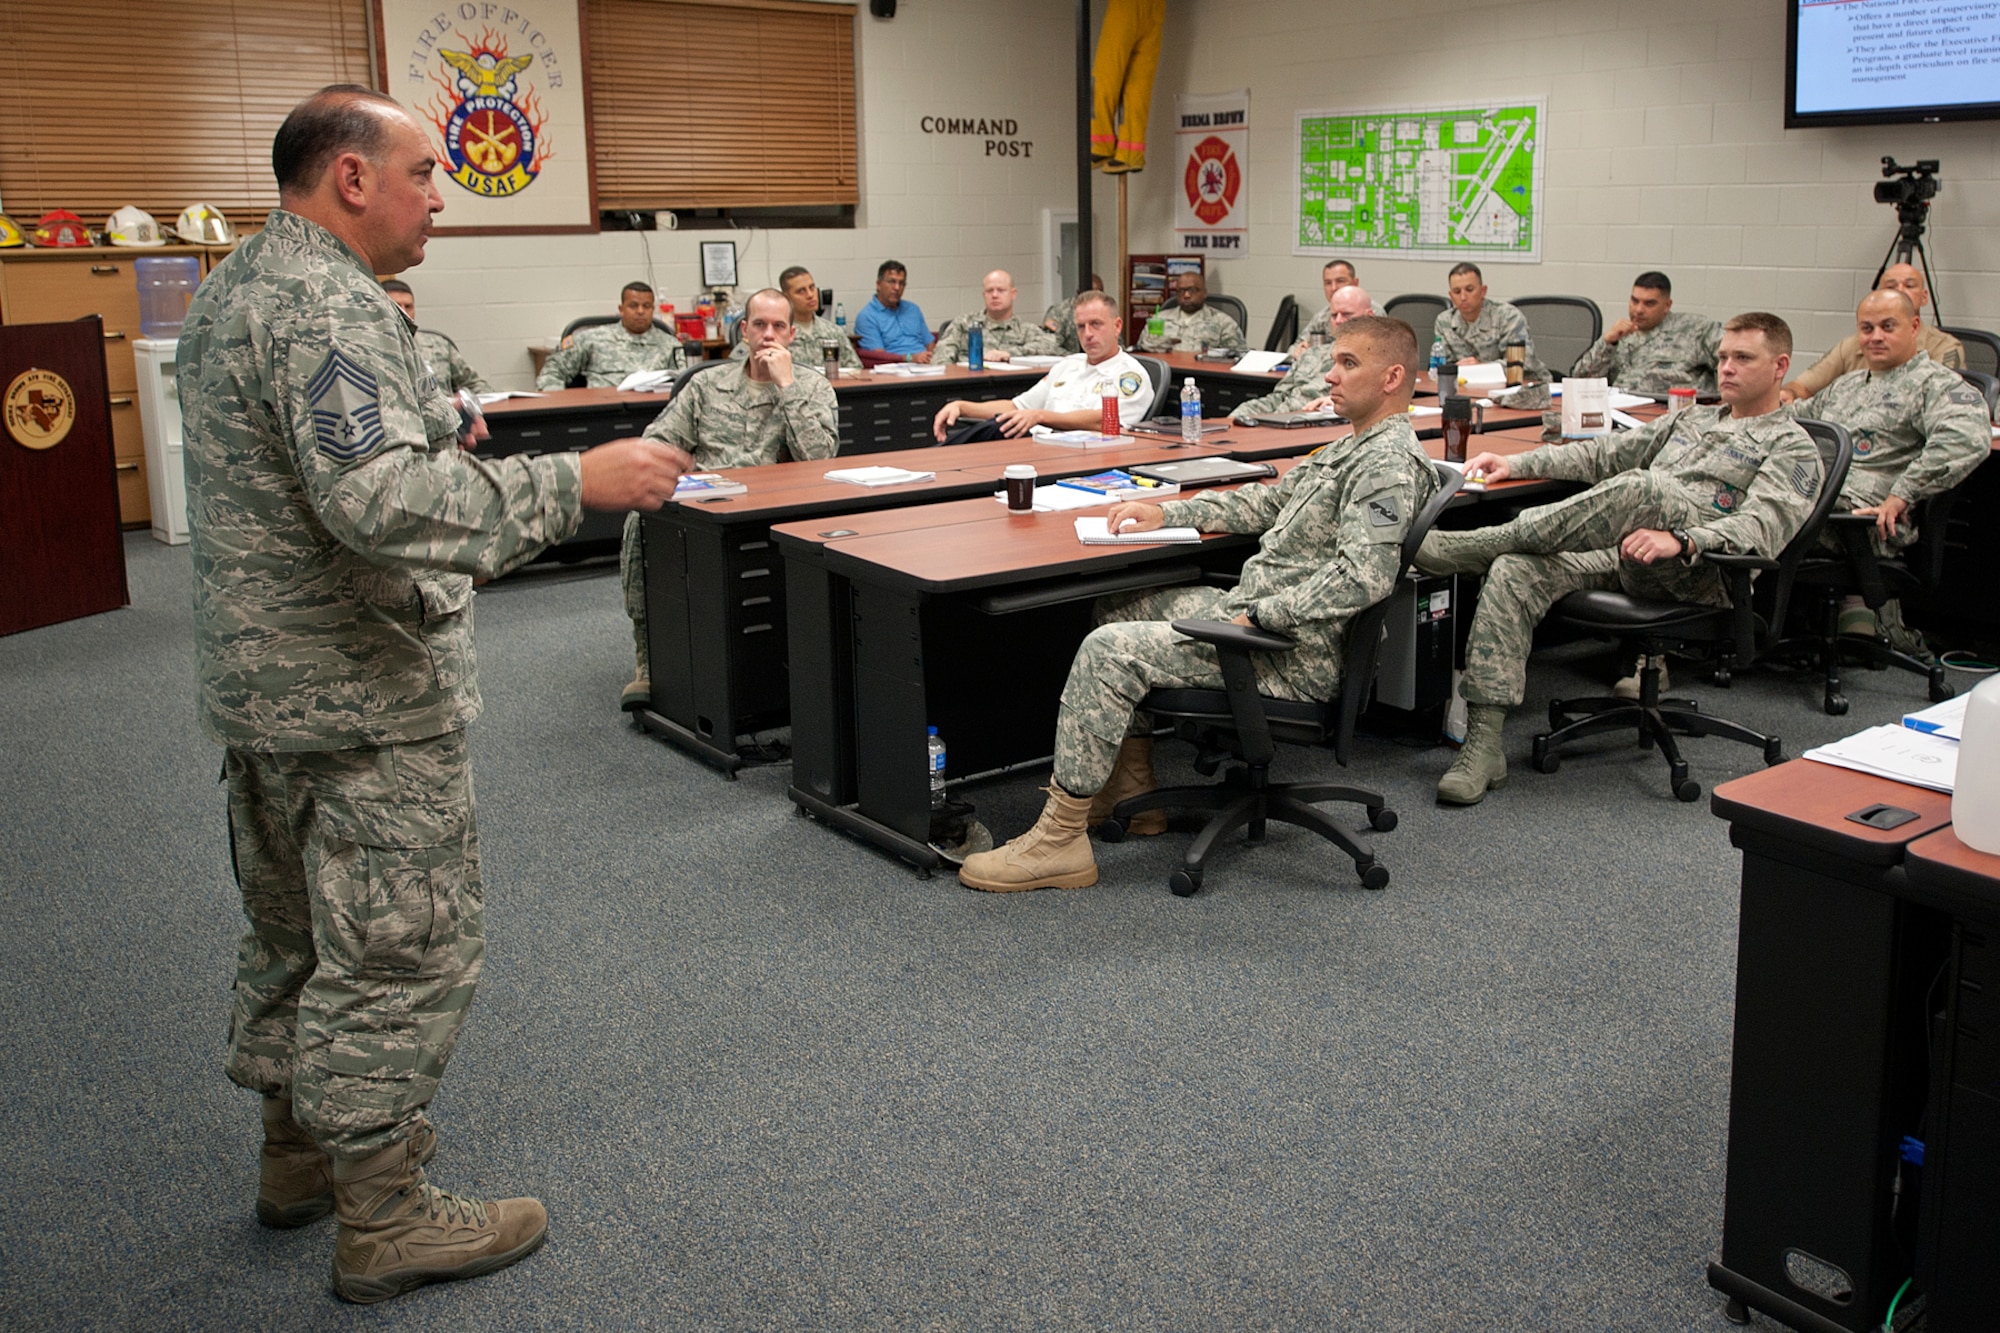 GOODFELLOW AIR FORCE BASE, Texas – Chief Master Sgt. Jesus Longoria Jr., 312th Training Squadron instructor, gives a lecture during the Fire Officer IV Course at the Louis F. Garland Department of Defense Fire Academy Sept. 19. Fire Officer IV is the capstone certification in the process of becoming a qualified fire chief. (U.S. Air Force photo/ Airman 1st Class Devin Boyer)